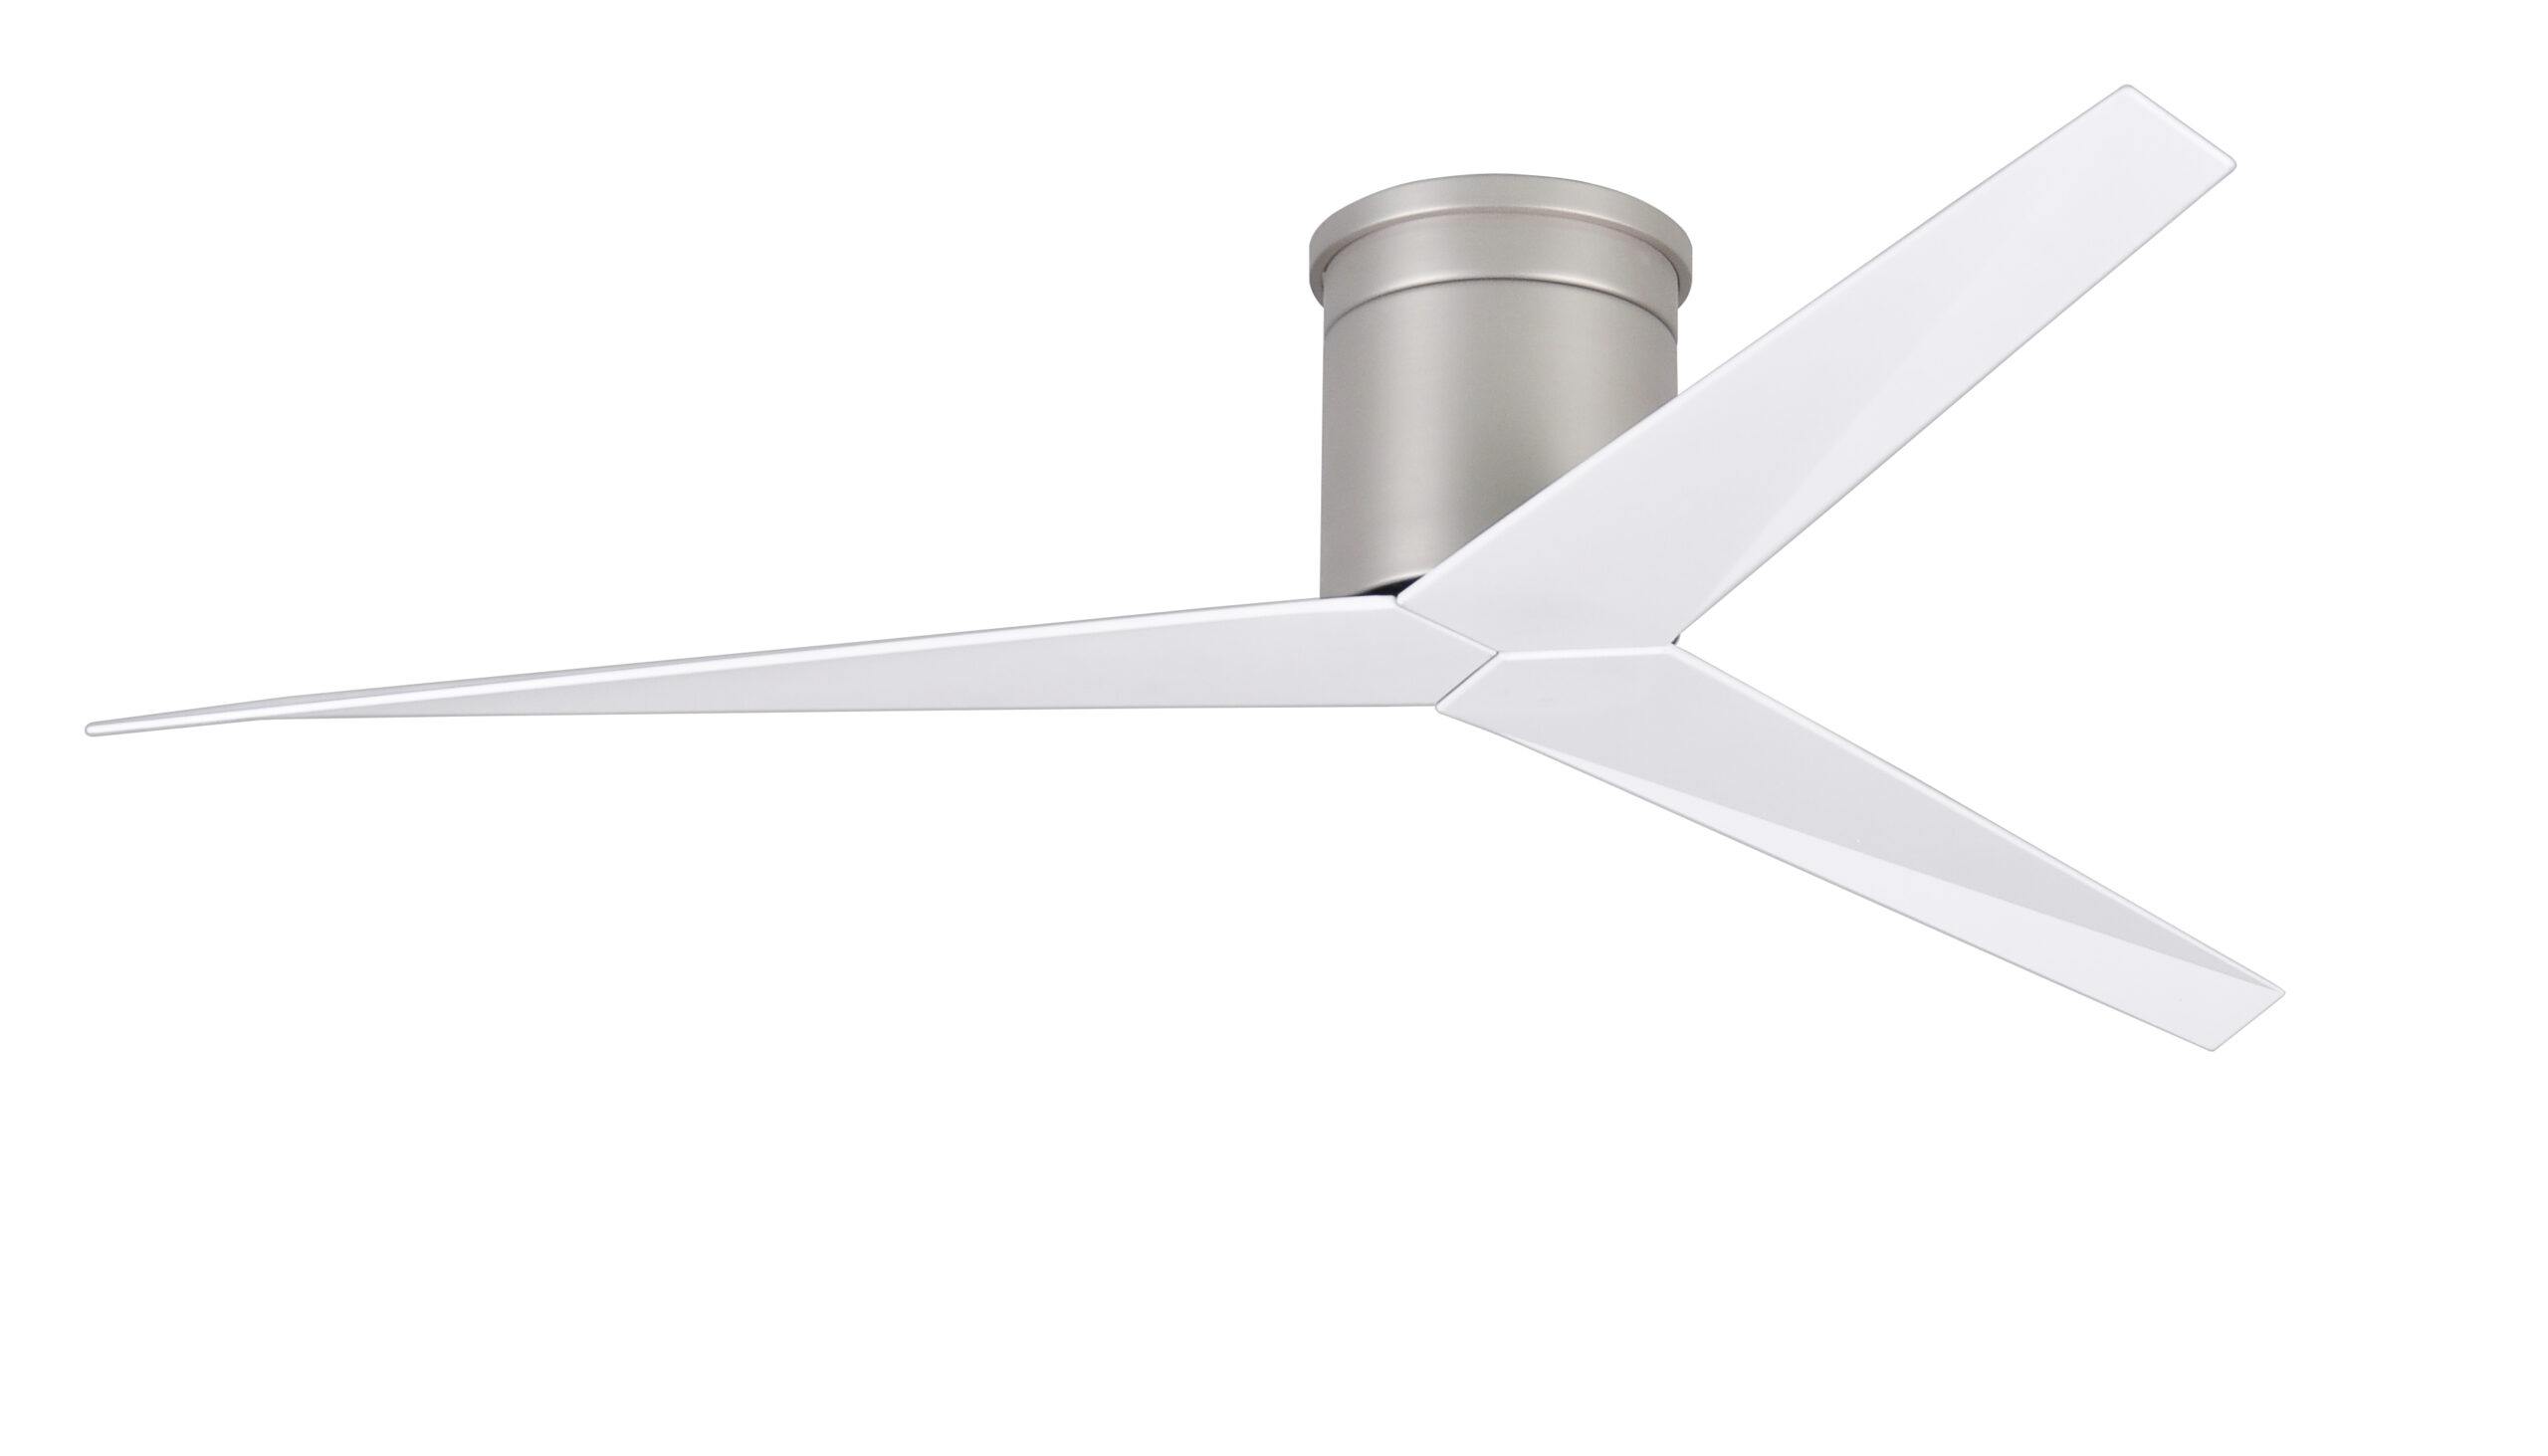 Eliza-H ceiling fan in Gloss White with Barn Wood blades